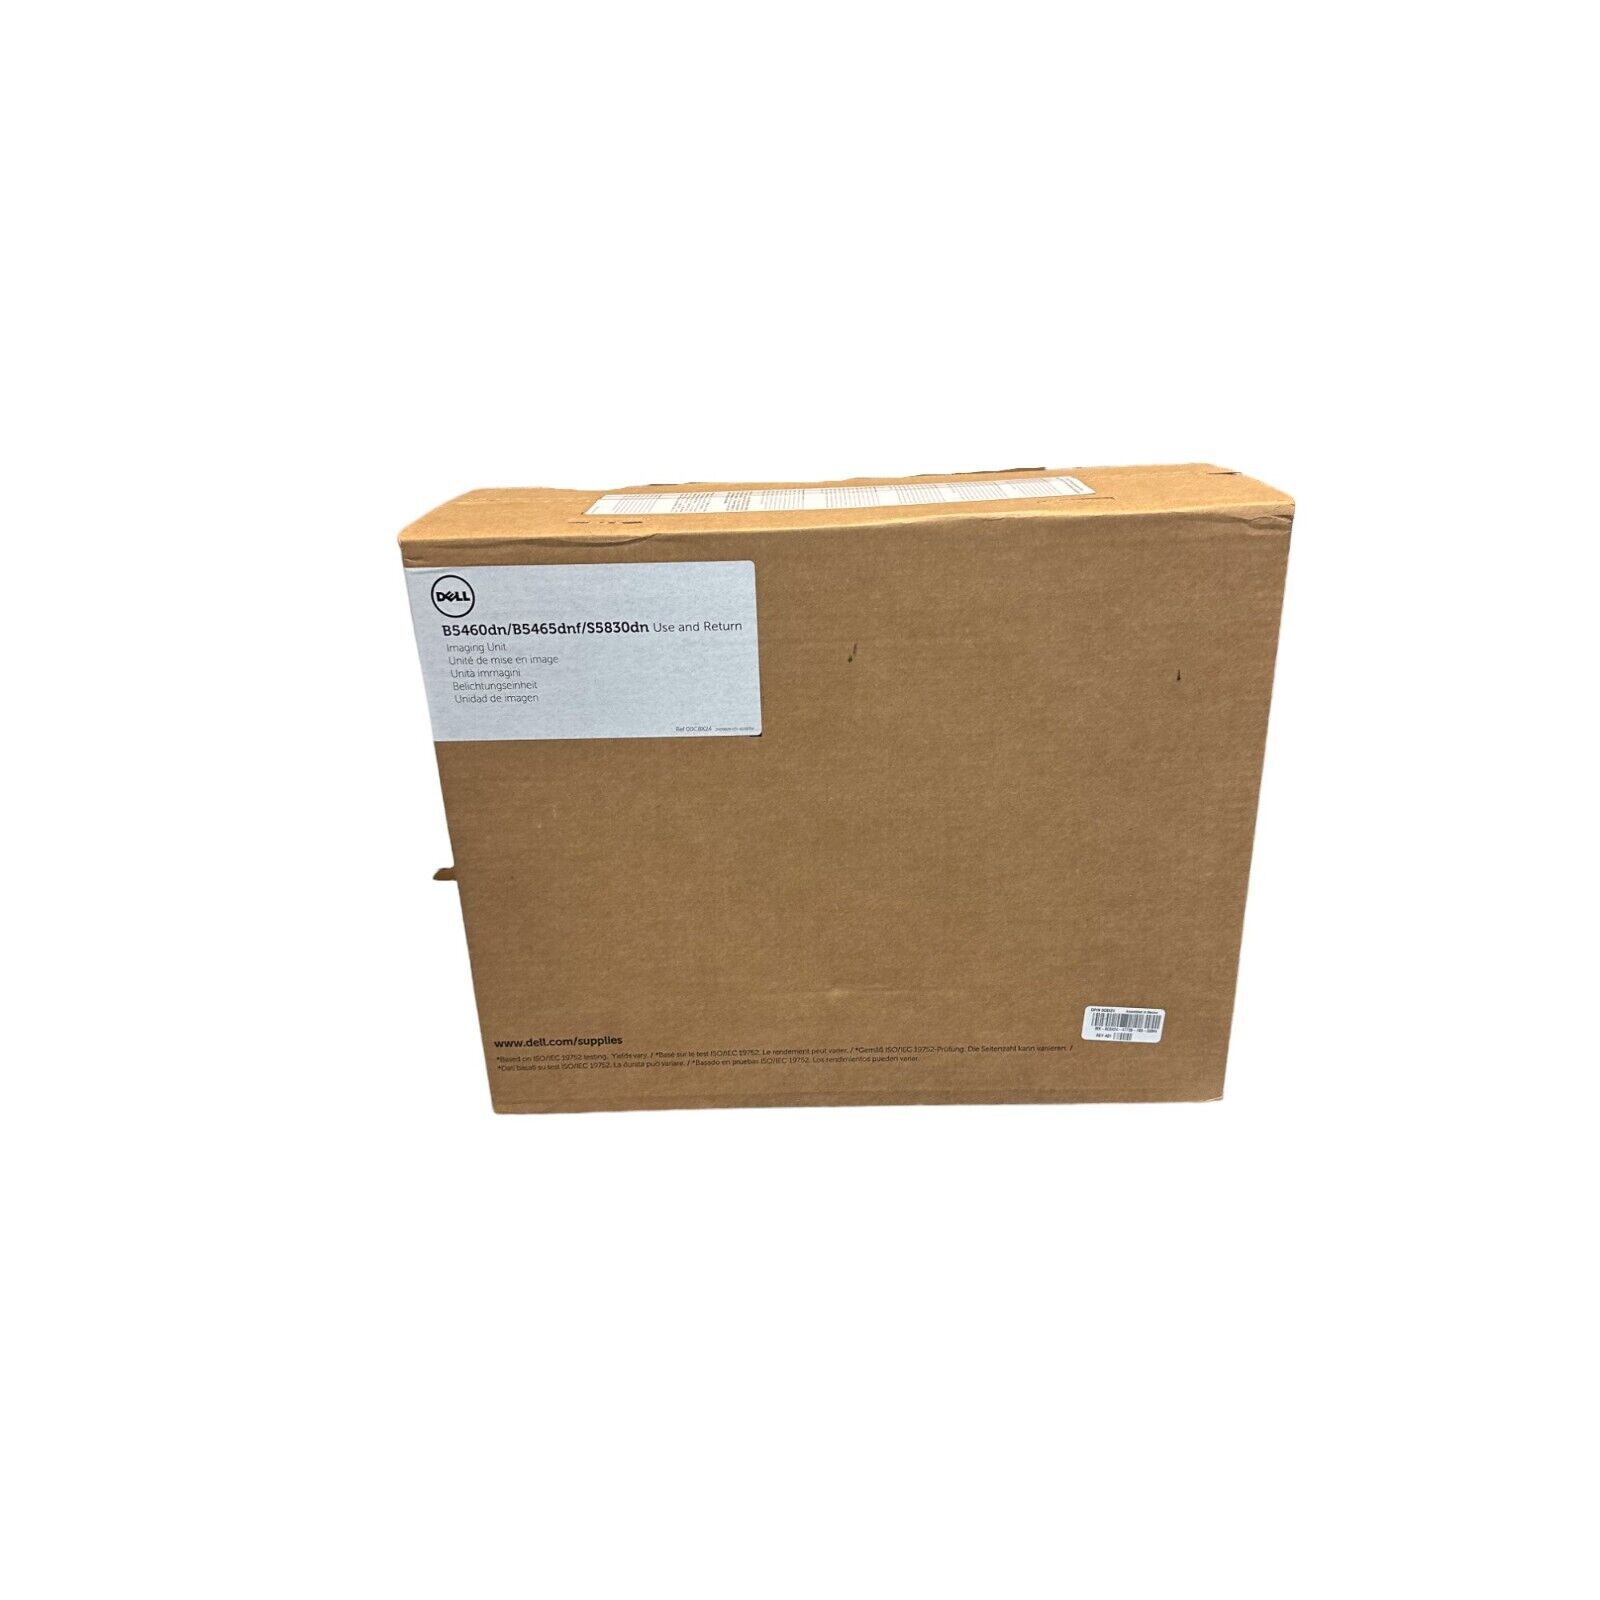 NEW SEALED DELL C8X24 100,000 PAGE IMAGING UNIT FOR B5460DN / B5465DNF / S5830DN